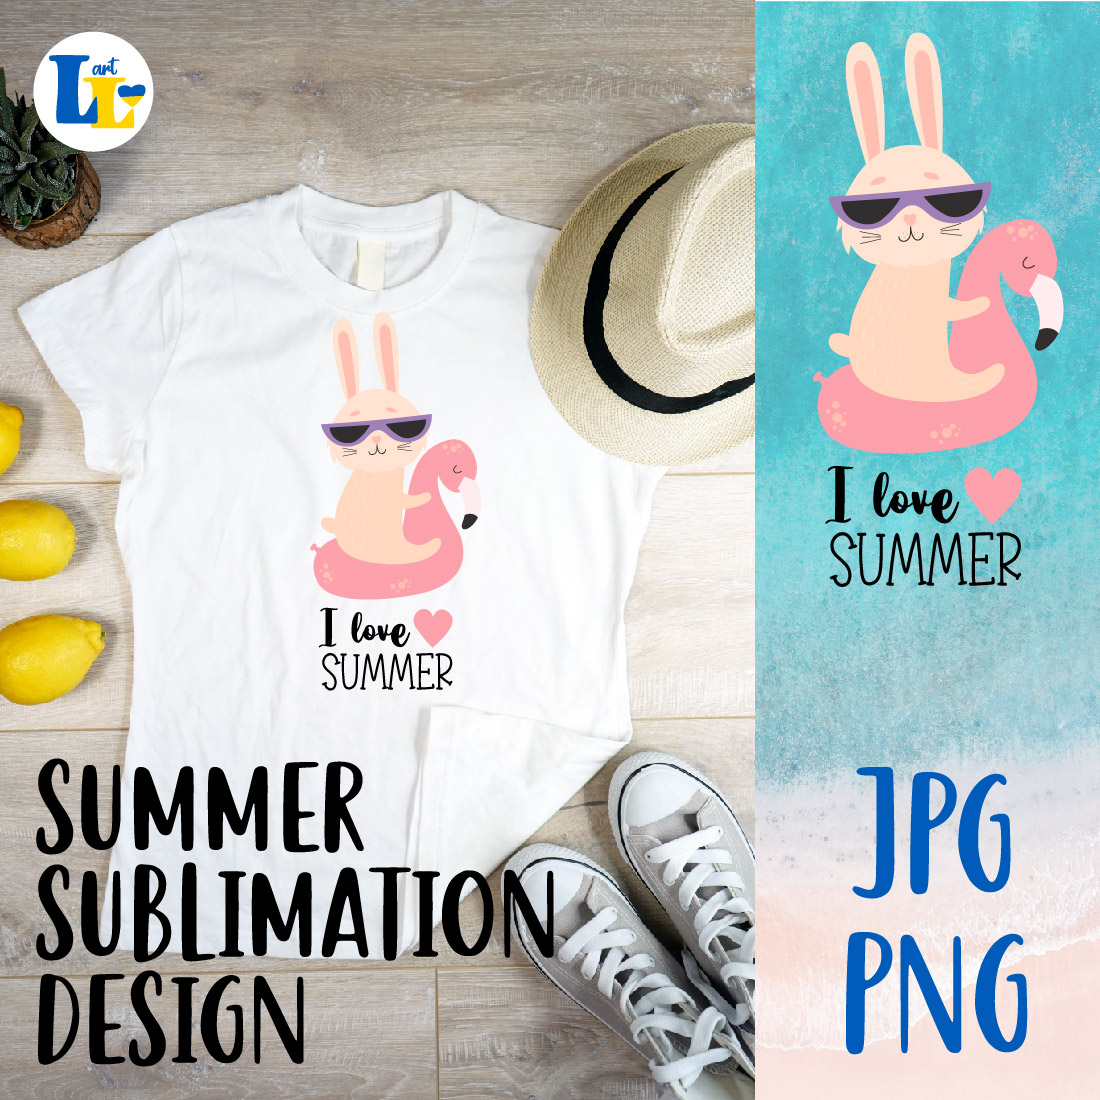 Beach Bunny Or Cute Summer Rabbit Sublimation Design Cover Image.